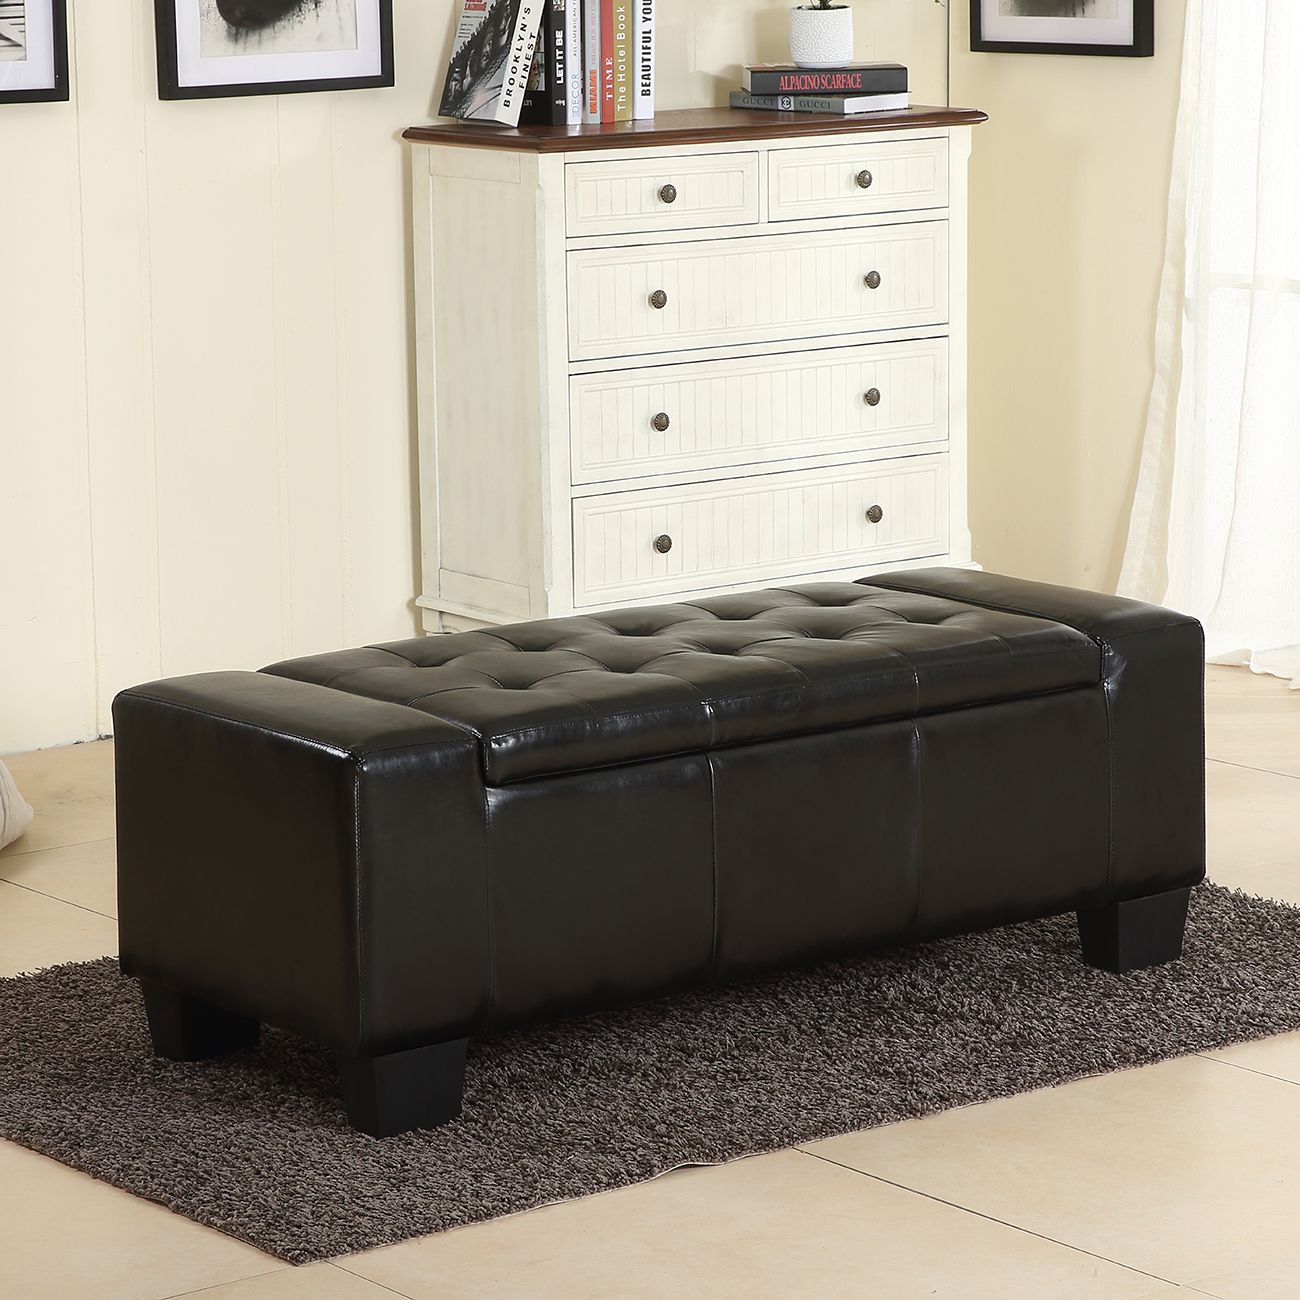 Belleze 51" Storage Ottoman Bench Black Faux Leather Large Rectangular Inside Black Faux Leather Ottomans With Pull Tab (View 11 of 20)